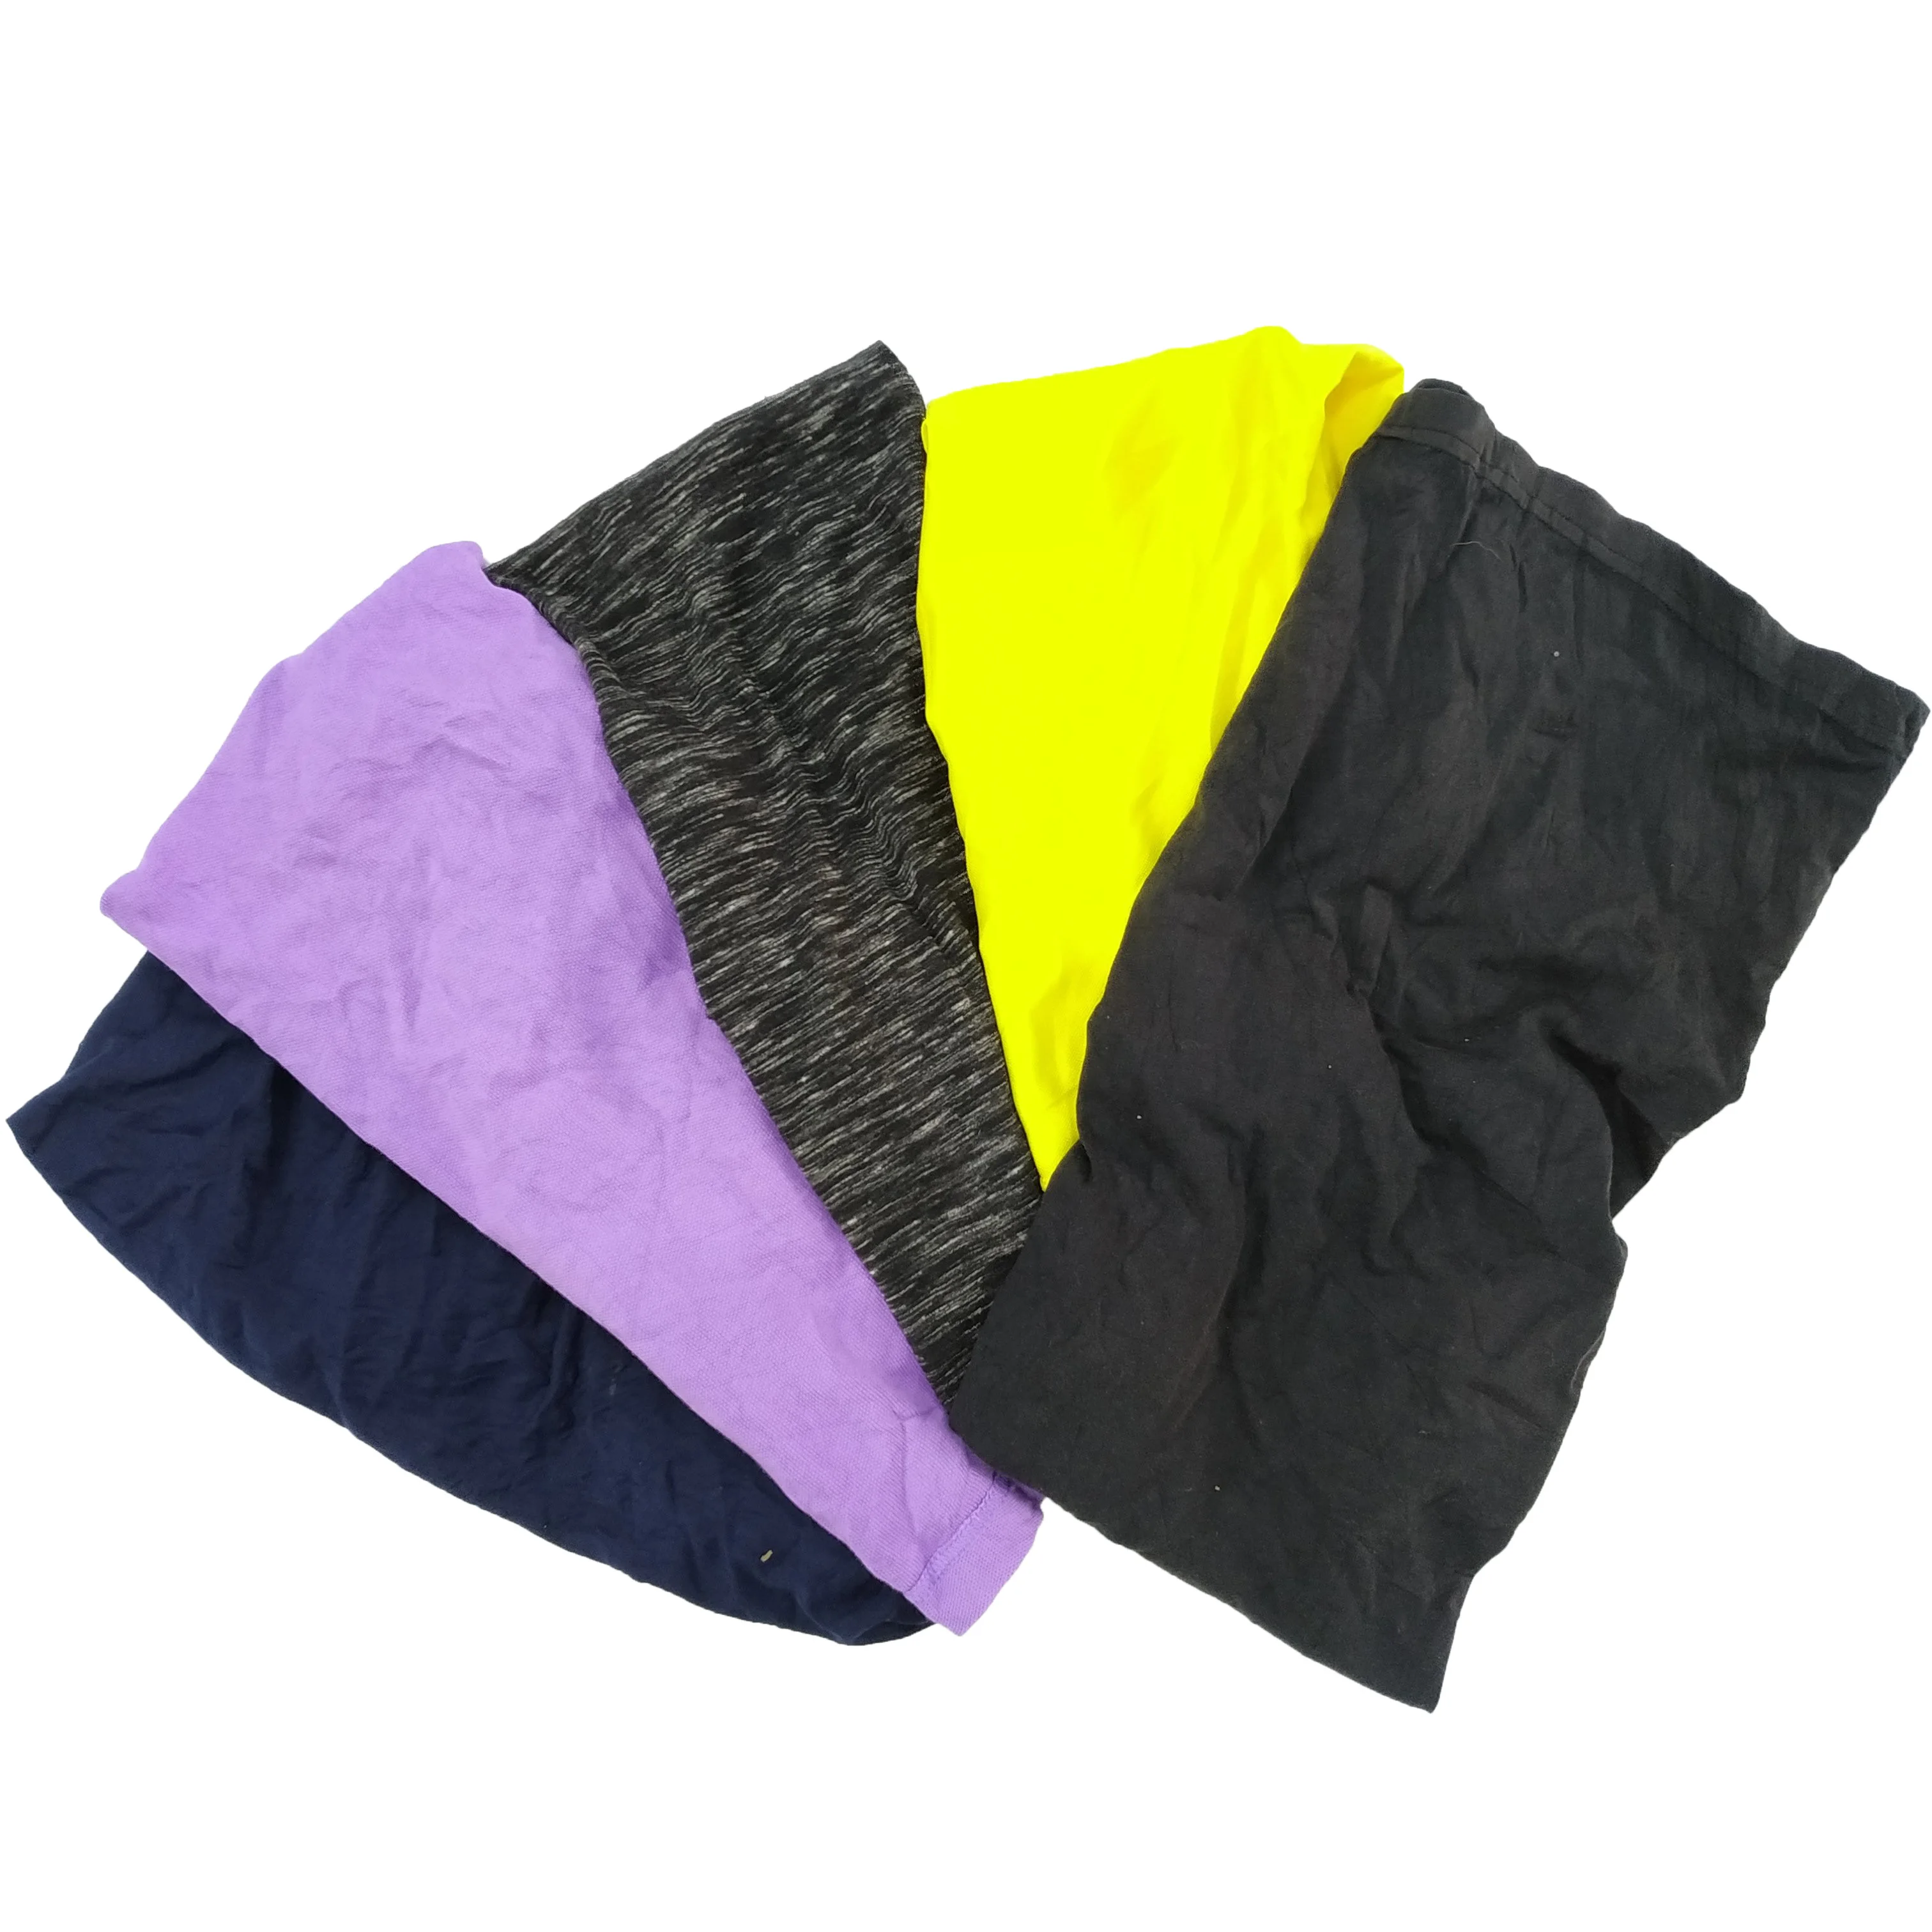 
Hot-selling 35-55cm dark color mixed t shirt second hand cloth cleaning wipes cotton rags 